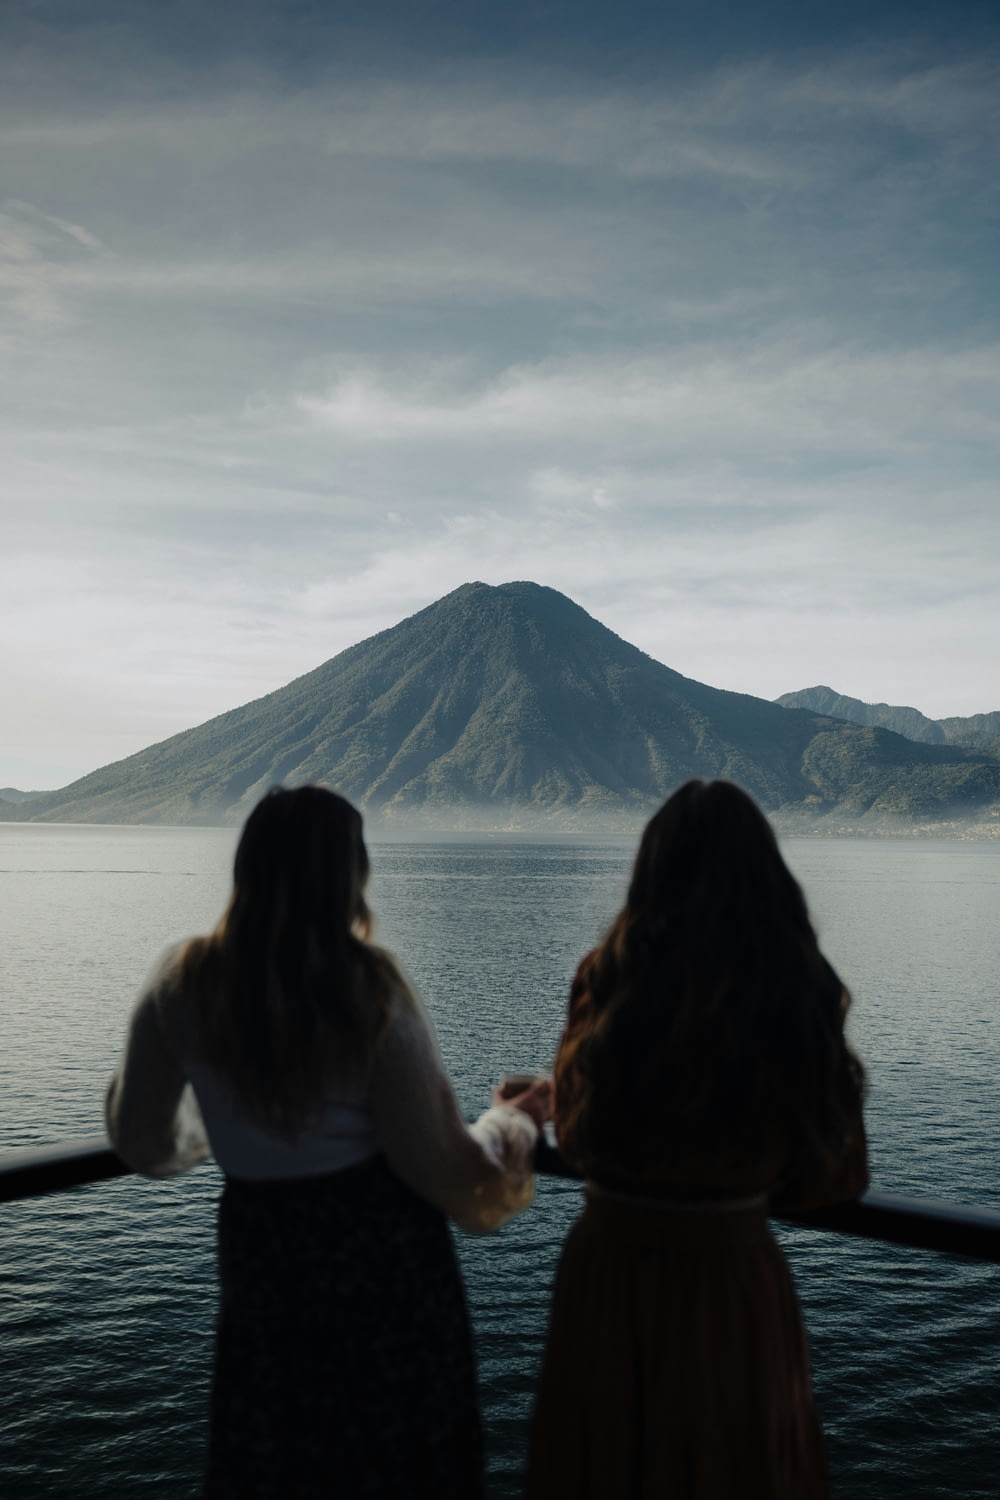 two women looking out over a body of water